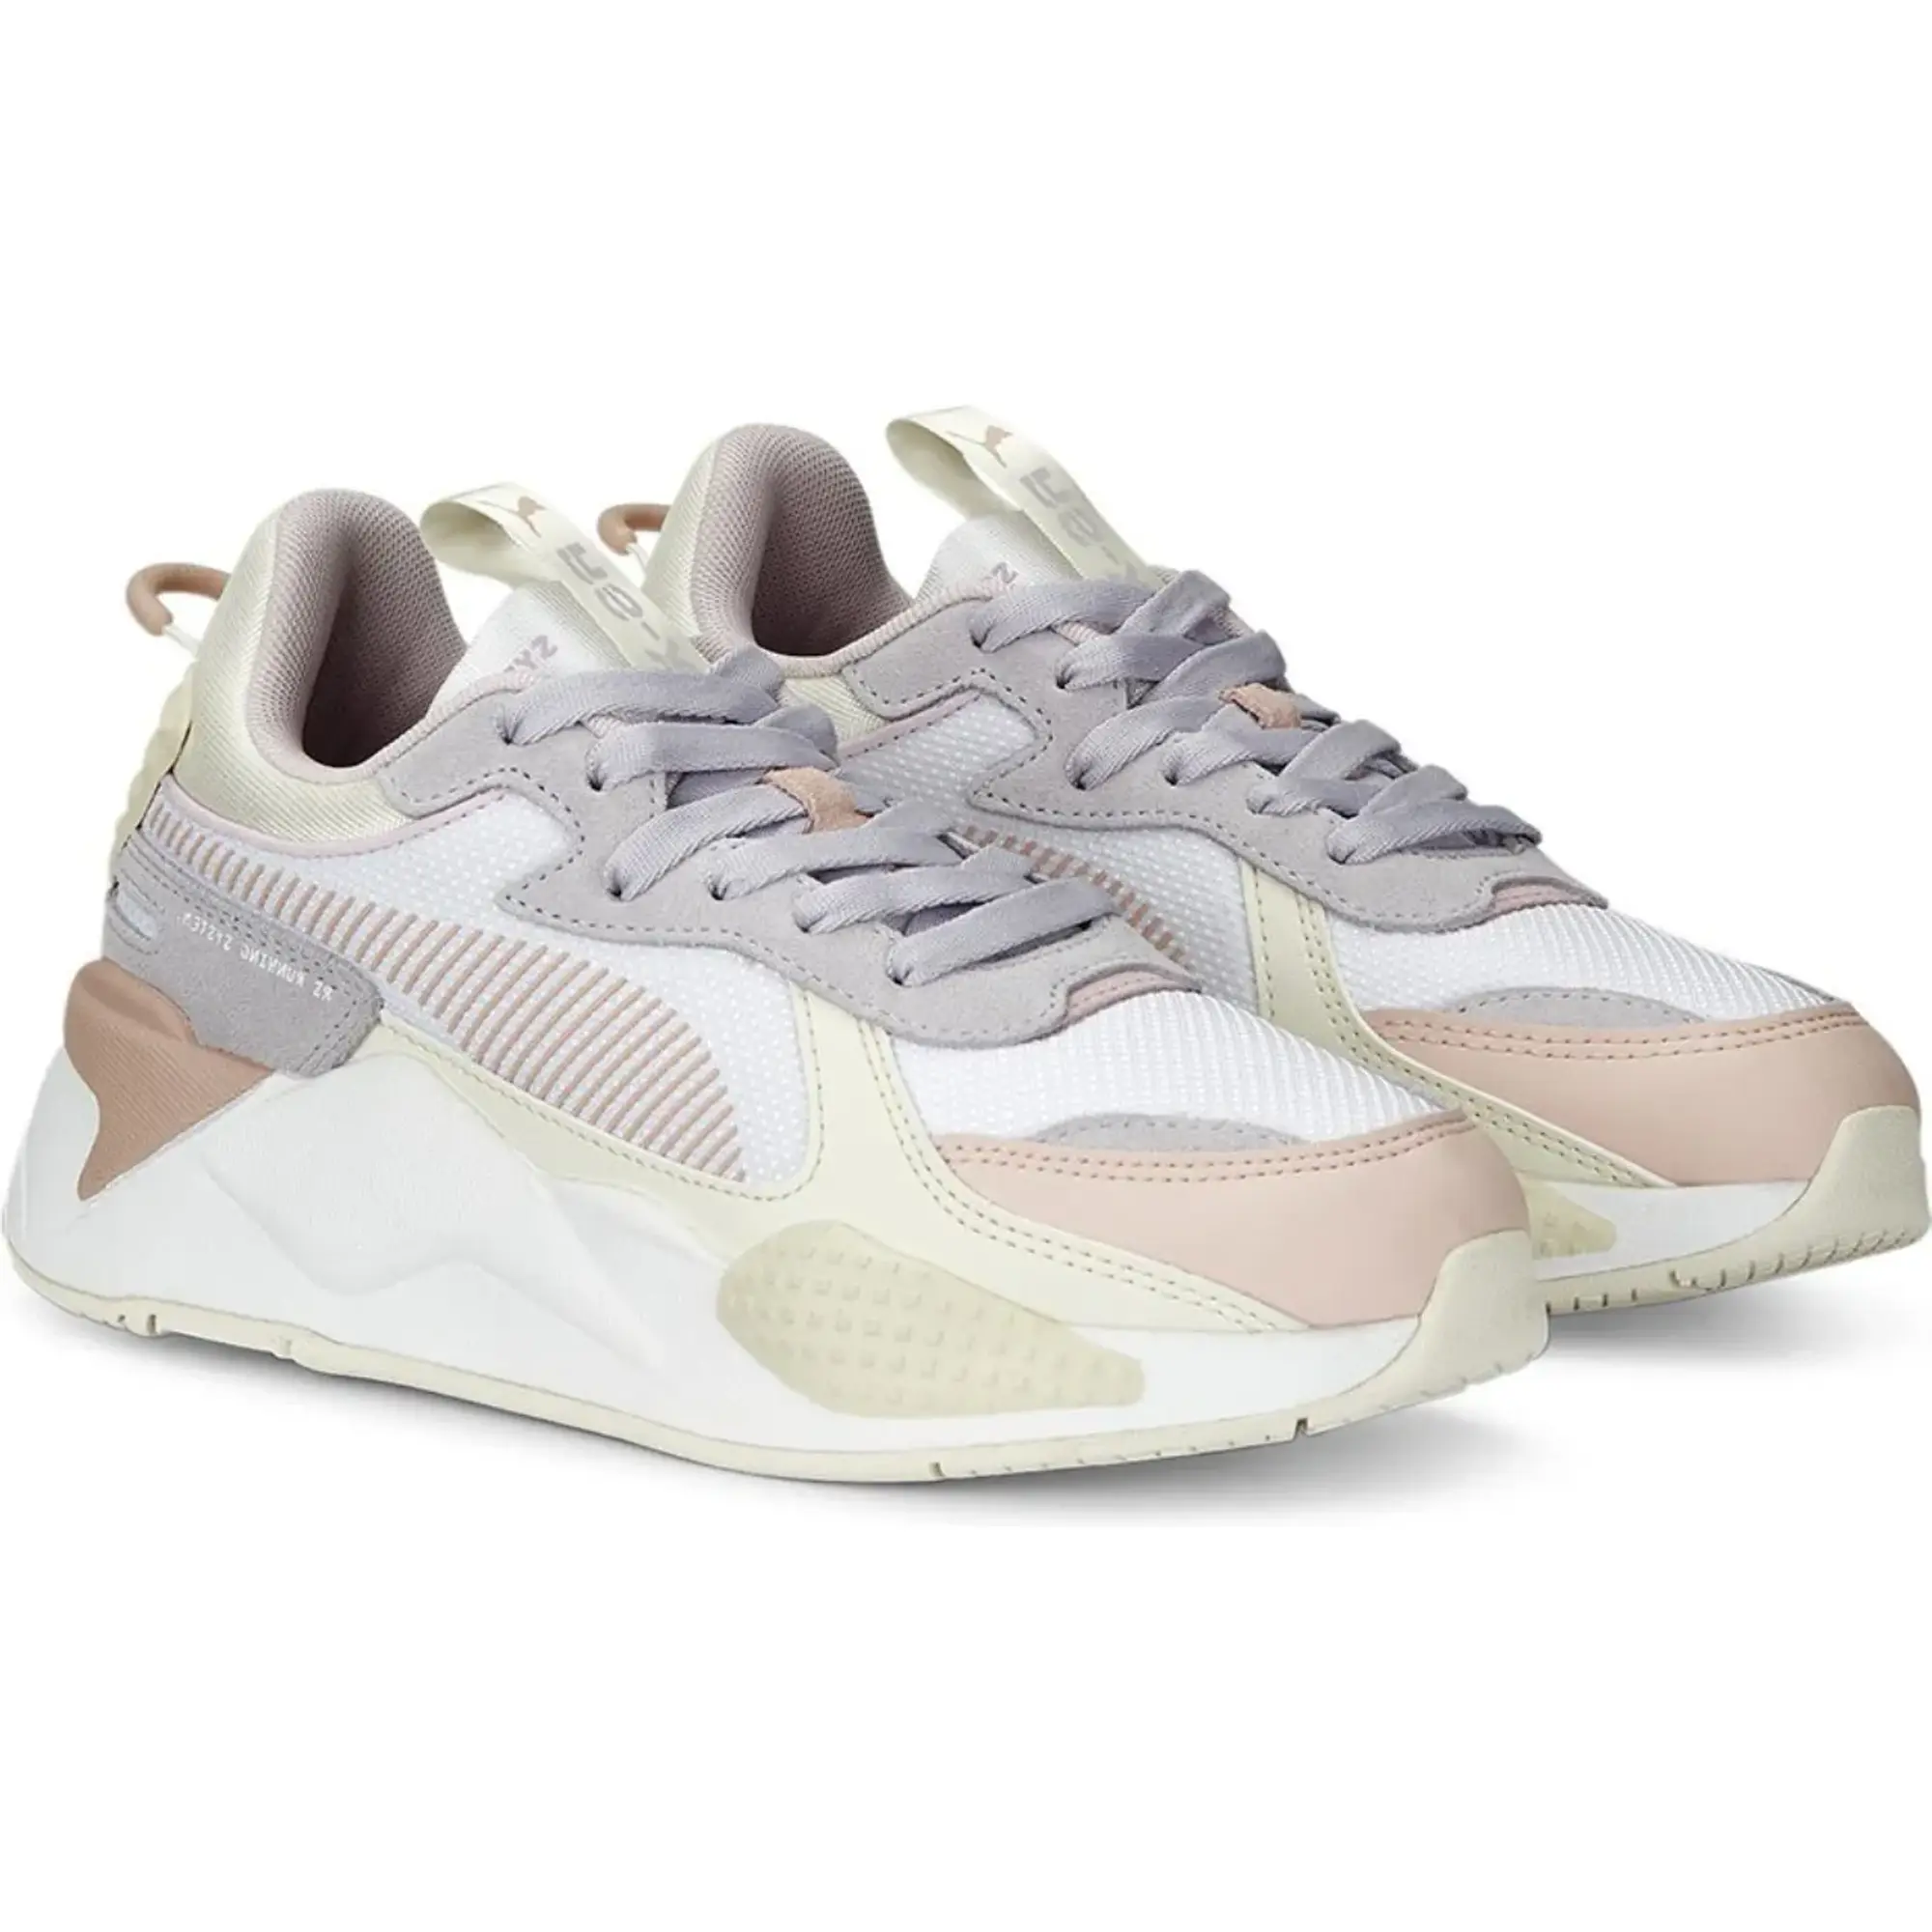 PUMA RS-X Candy Sneakers Women, White/Spring Lavender